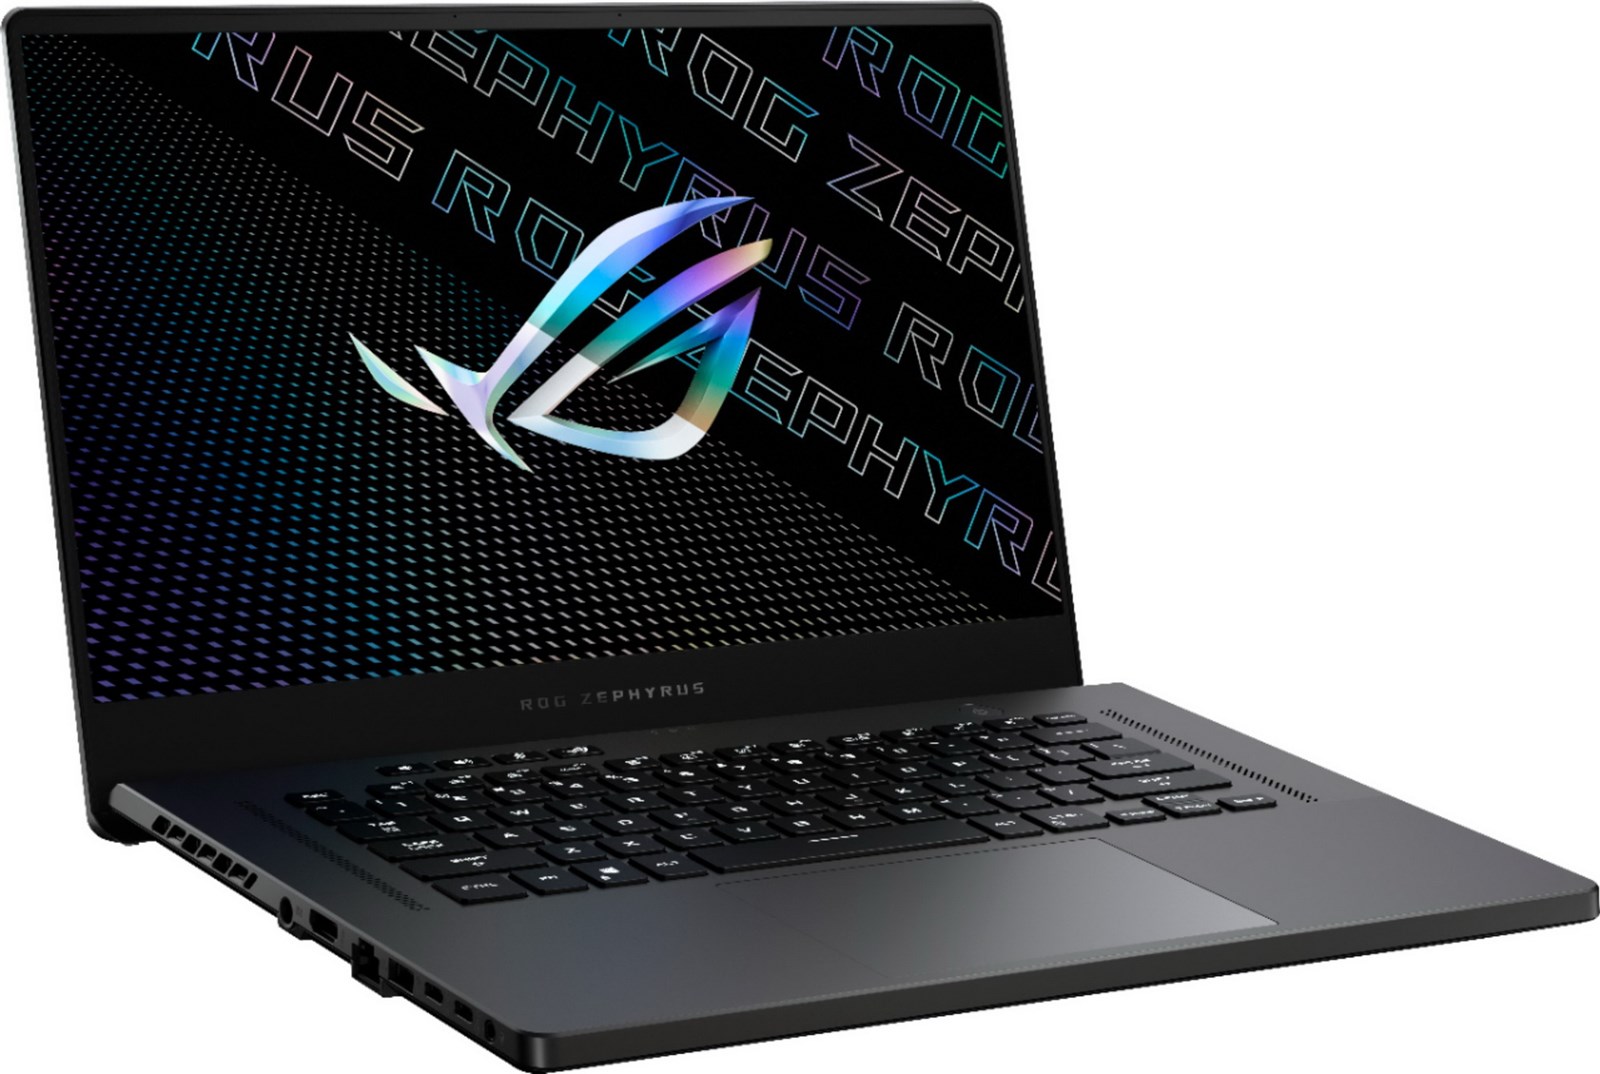 ASUS - ROG Zephyrus G15 15.6" 165Hz (3ms) WQHD IPS-Level Gaming Laptop - AMD Ryzen 9 5900Hs - 16GB Memory - NVIDIA GeForce RTX 3070 - 1TB SSD | GA503QR (2021) | (Same Day Delivery)